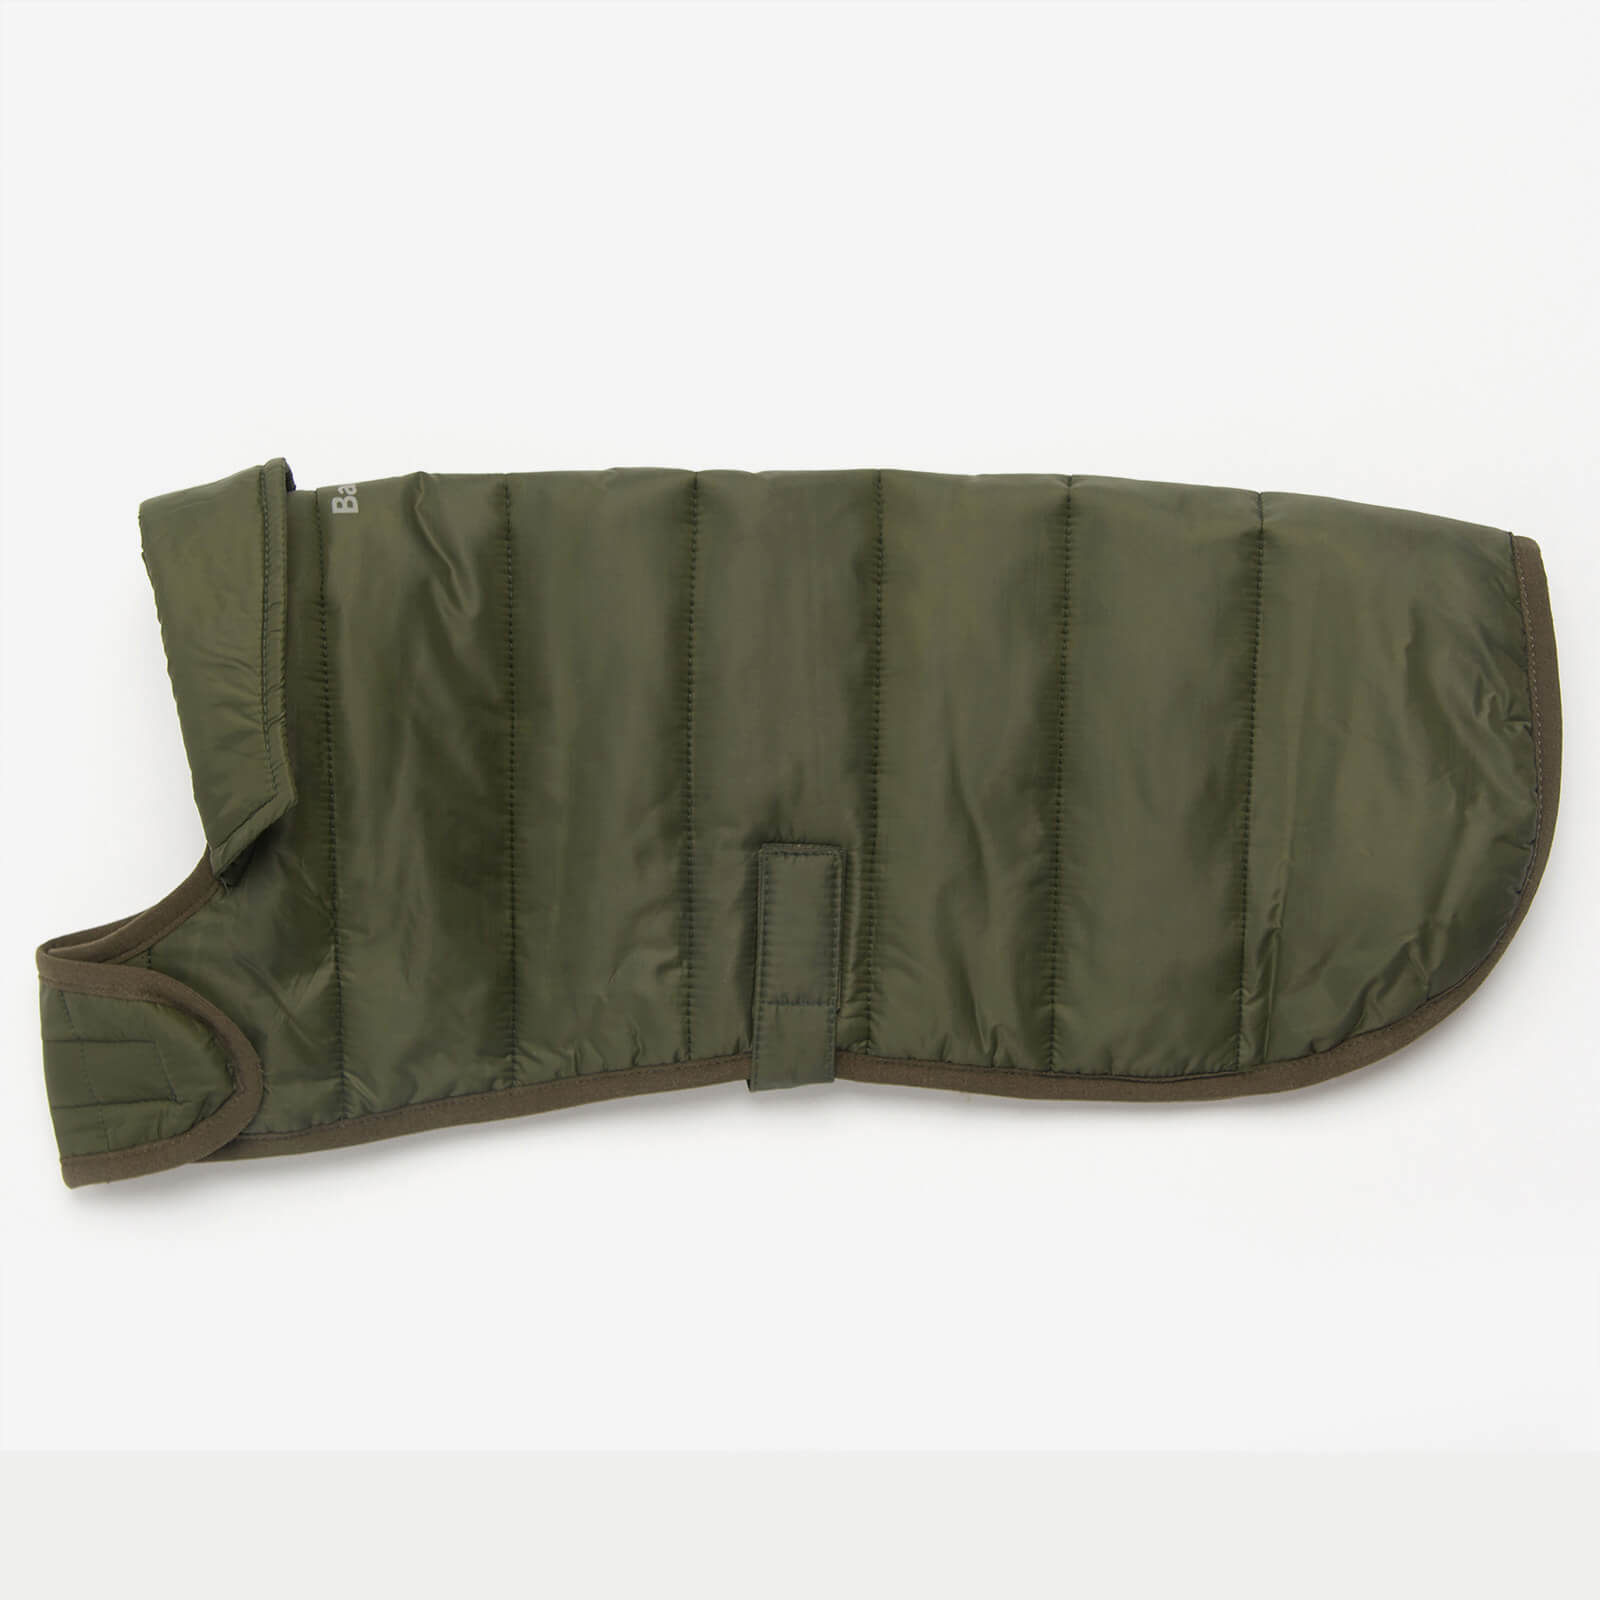 Barbour Baffle Quilted Dog Coat - Olive - XS